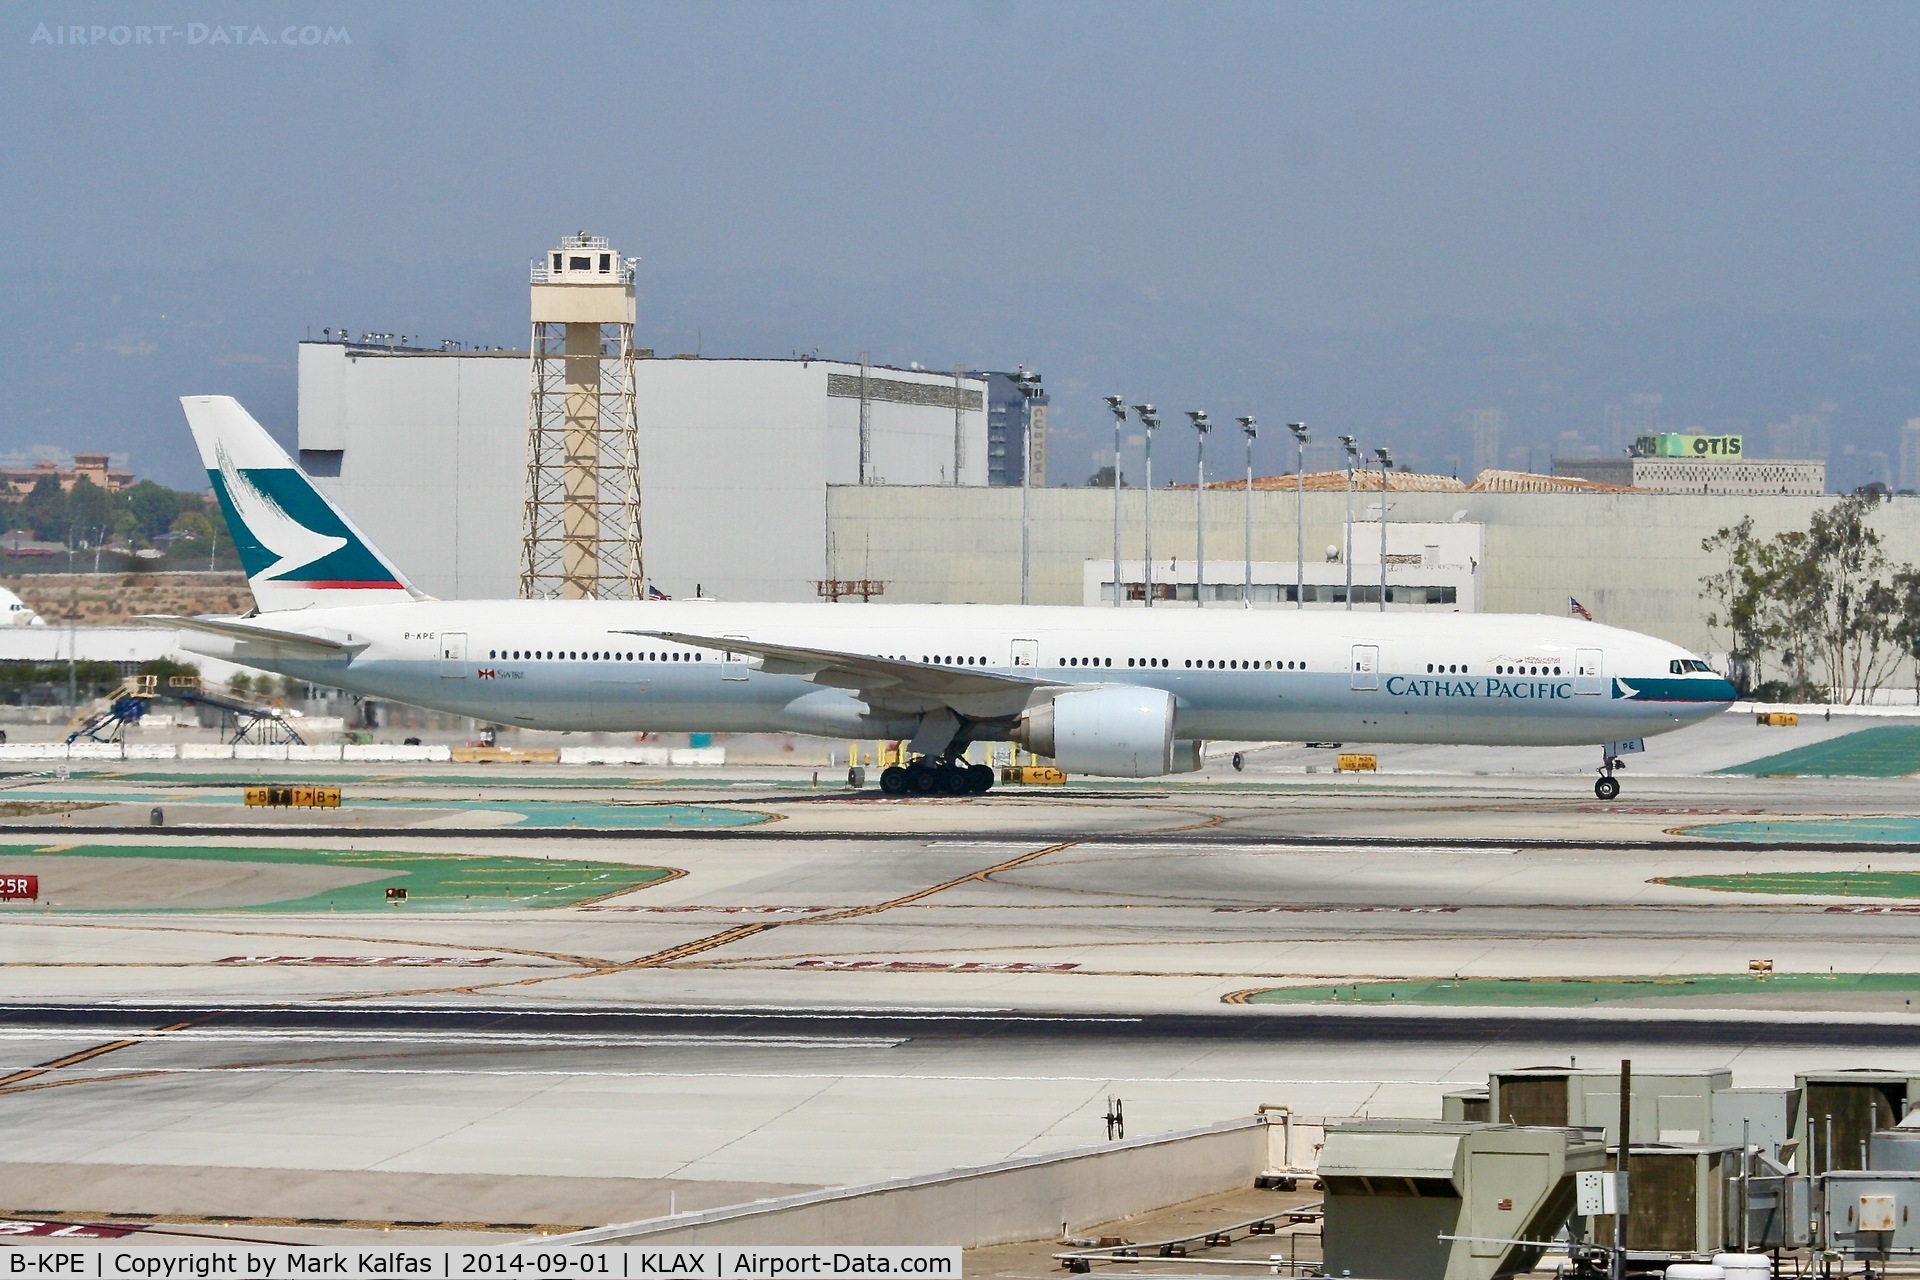 B-KPE, 2007 Boeing 777-367/ER C/N 36156, CATHAY PACIFIC Boeing 777-367/ER, at LAX